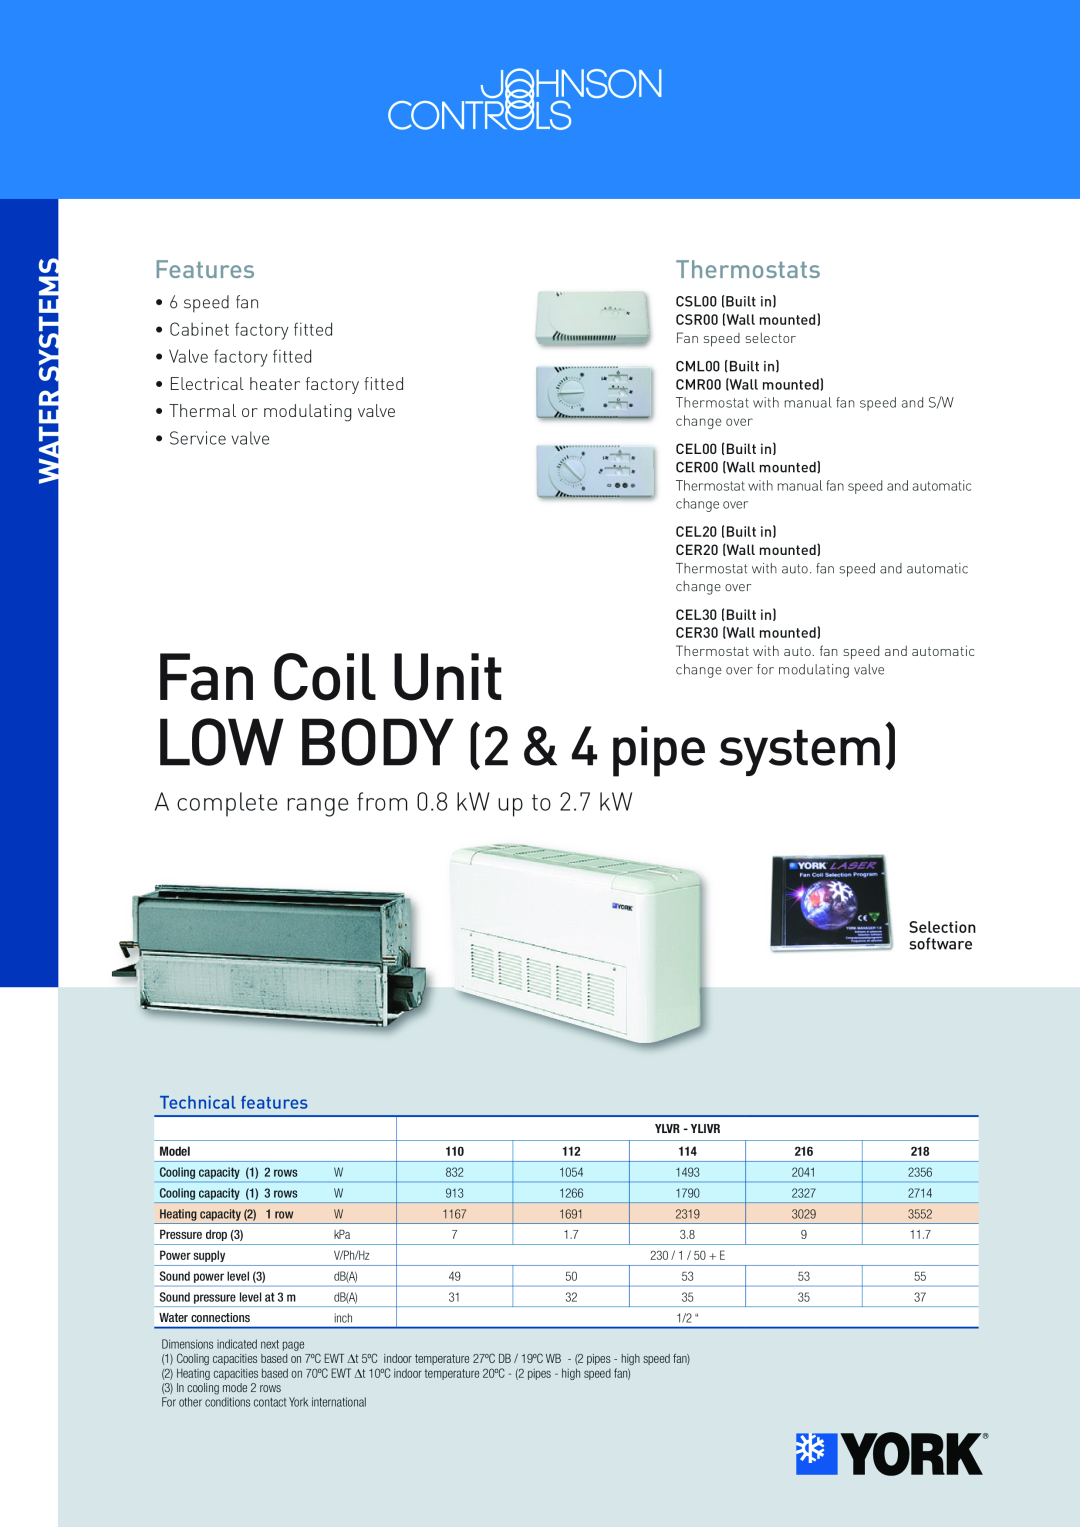 York 110 dimensions Water Systems, Technical features, Selection software, LOW BODY 2 & 4 pipe system, Features, speed fan 